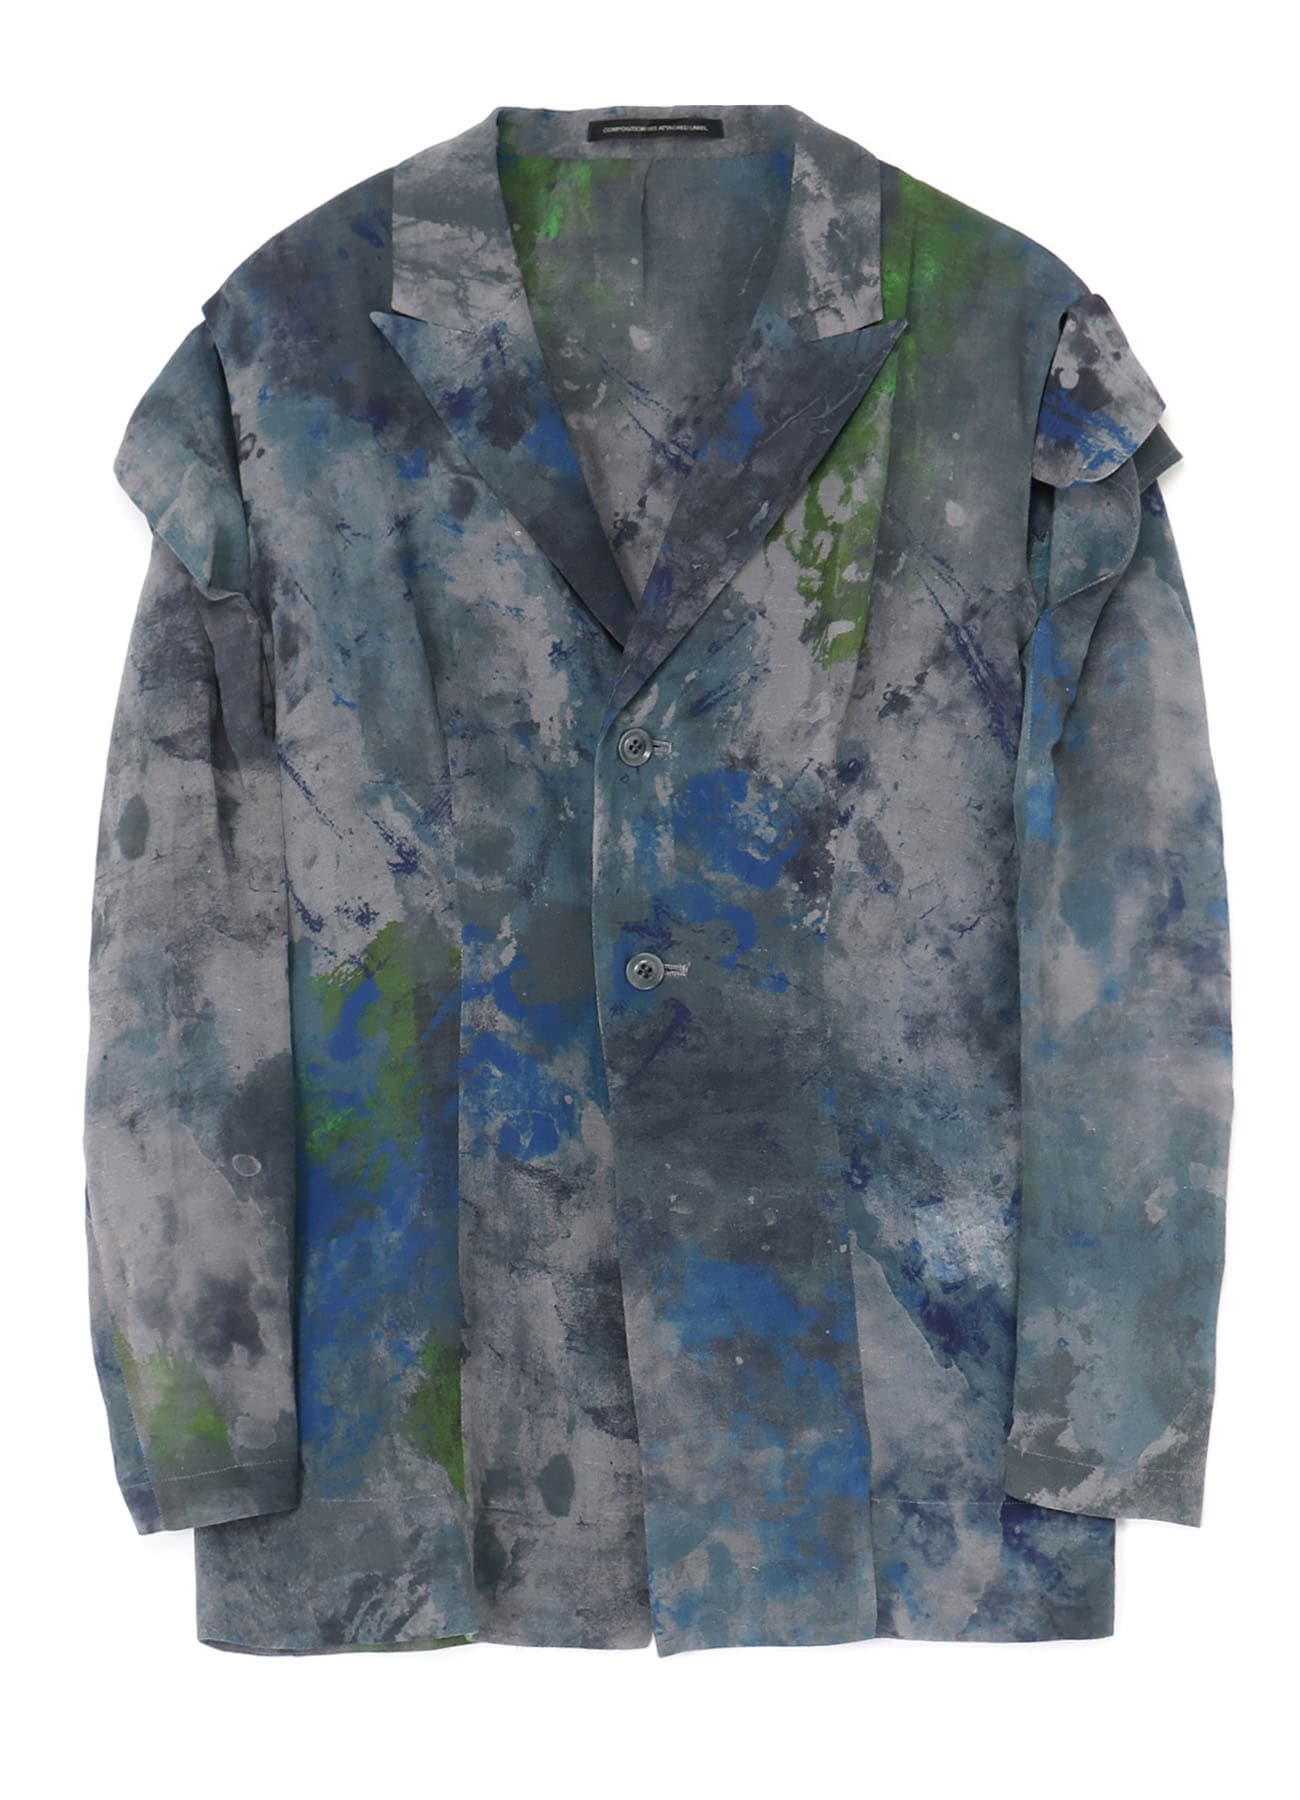 PAINT DESIGN SLEEVE HANG CLOTH JACKET(XS Light Grey): Y's｜THE 